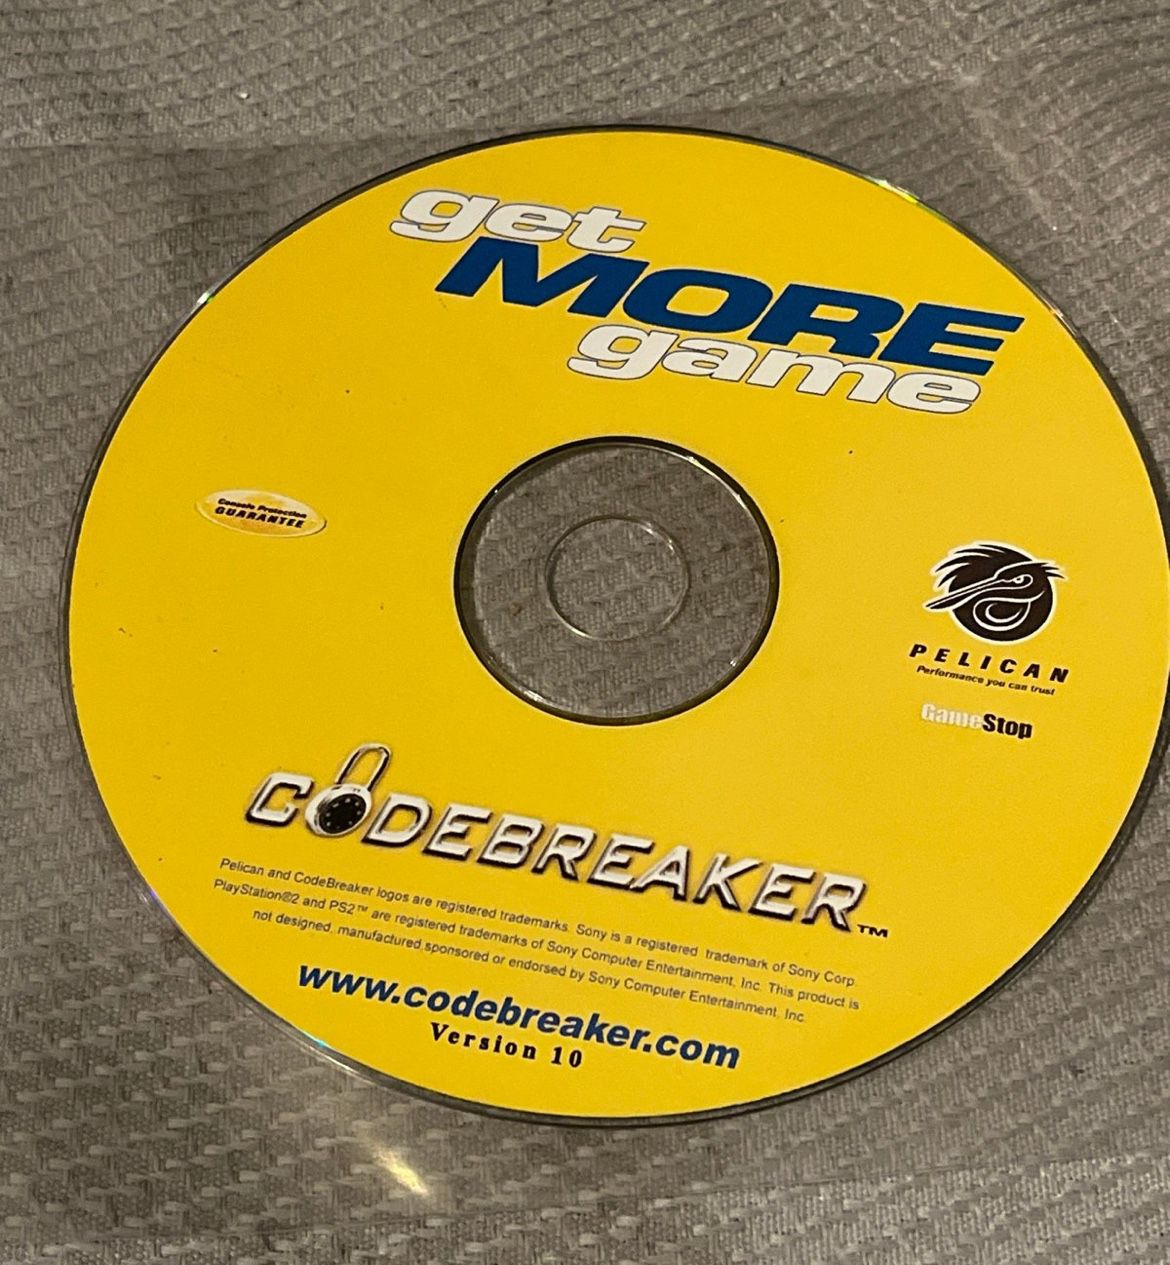 CodeBreaker Version 10.0 Get More Game PS2 Playstation 2 Pelican Disc Only